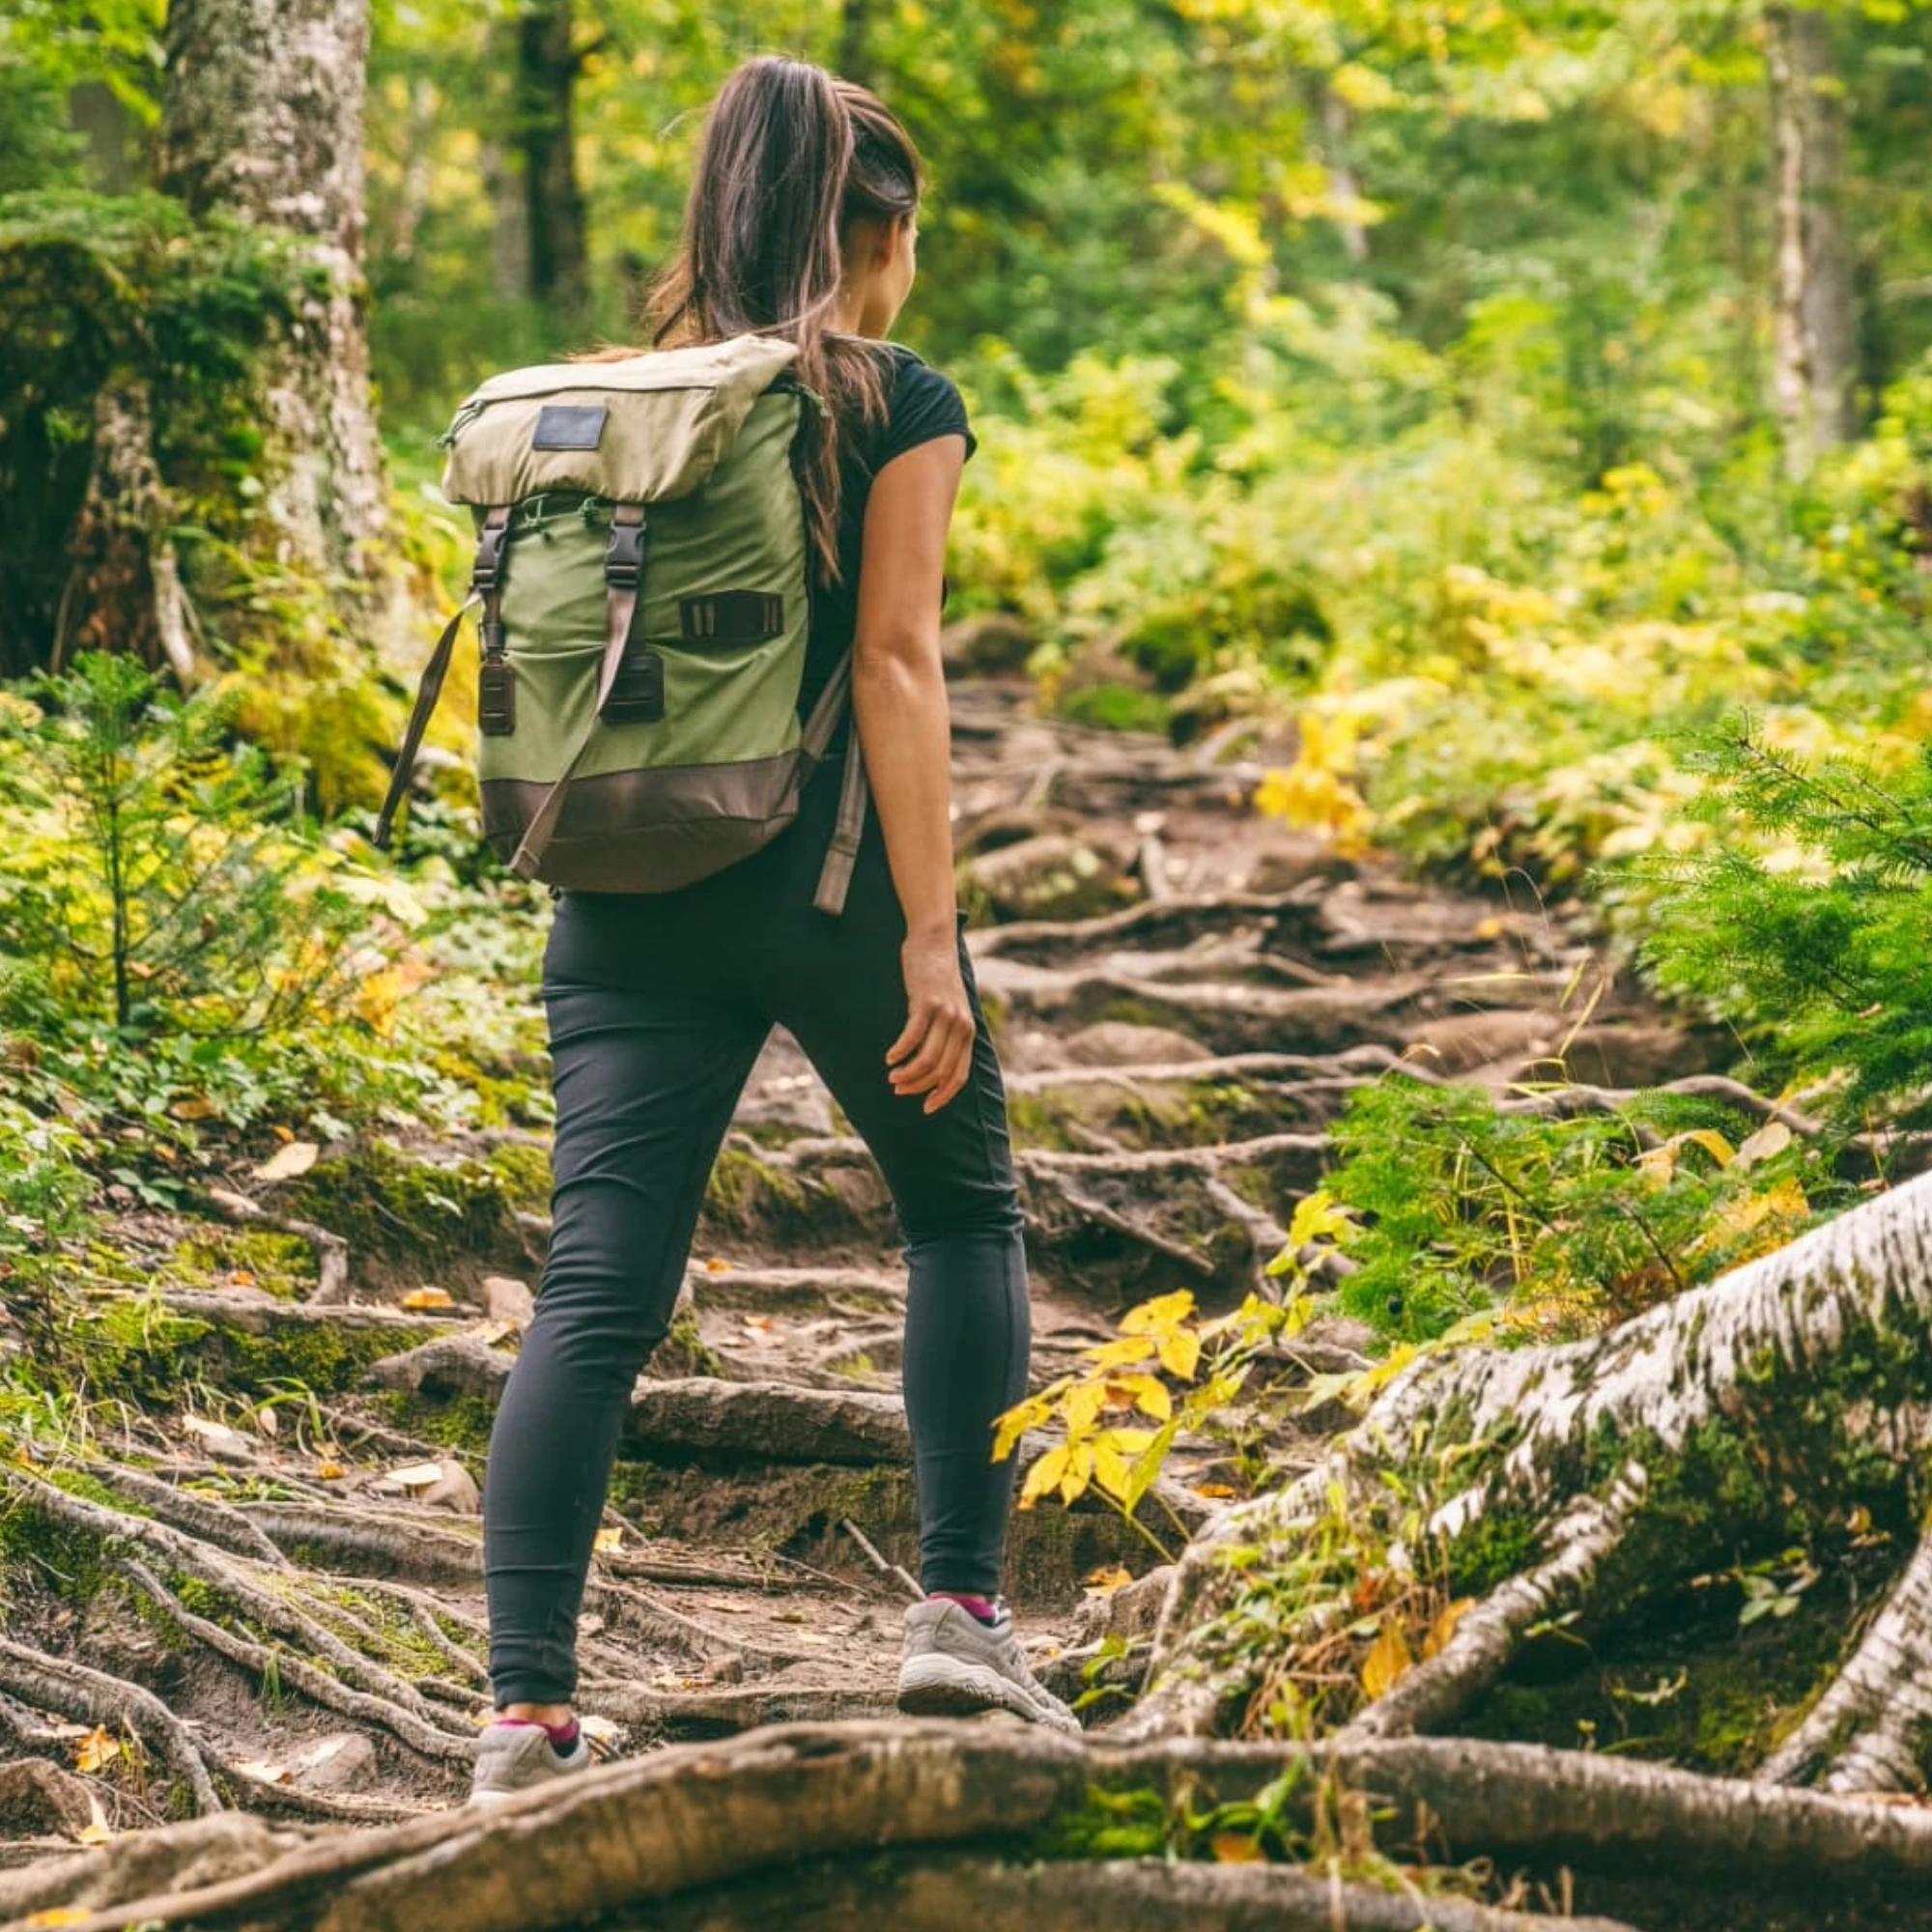 HIKING SAFETY CHECKLIST FOR A SAFE HIKING ADVENTURE